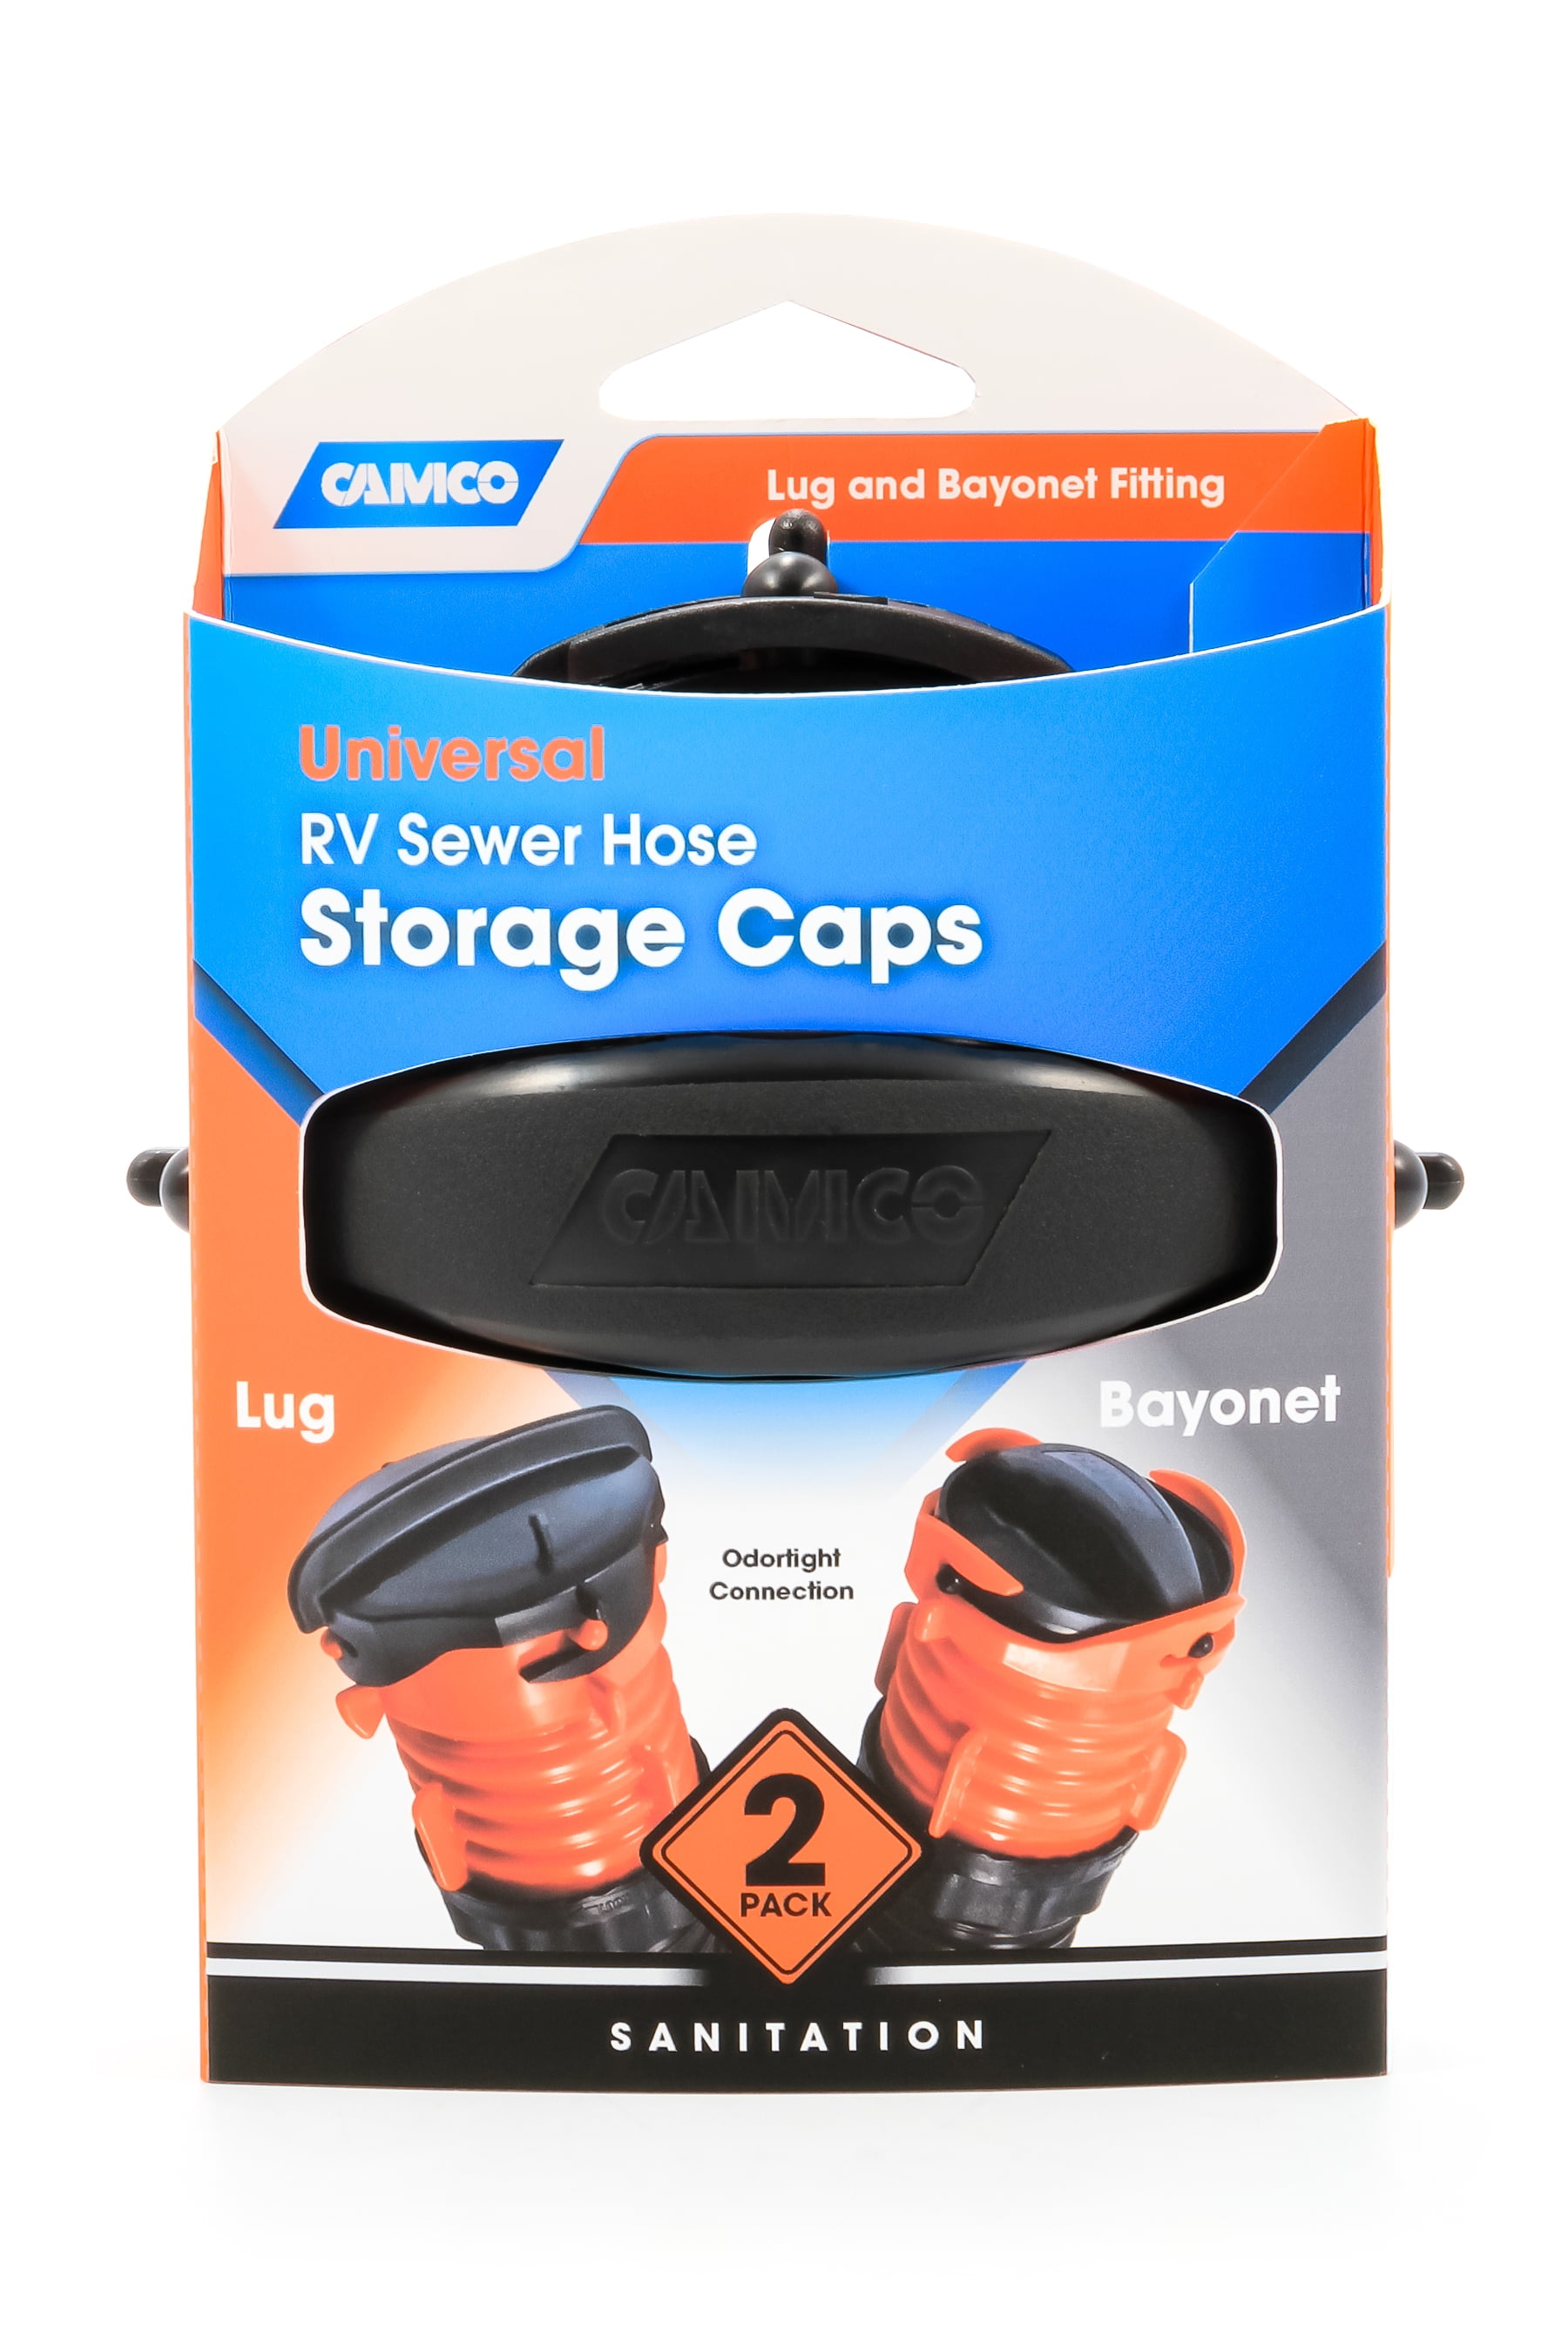 2 Pack Camco RV Sewer Hose Storage Cap Odor Tight Connection for RVs Trailers 